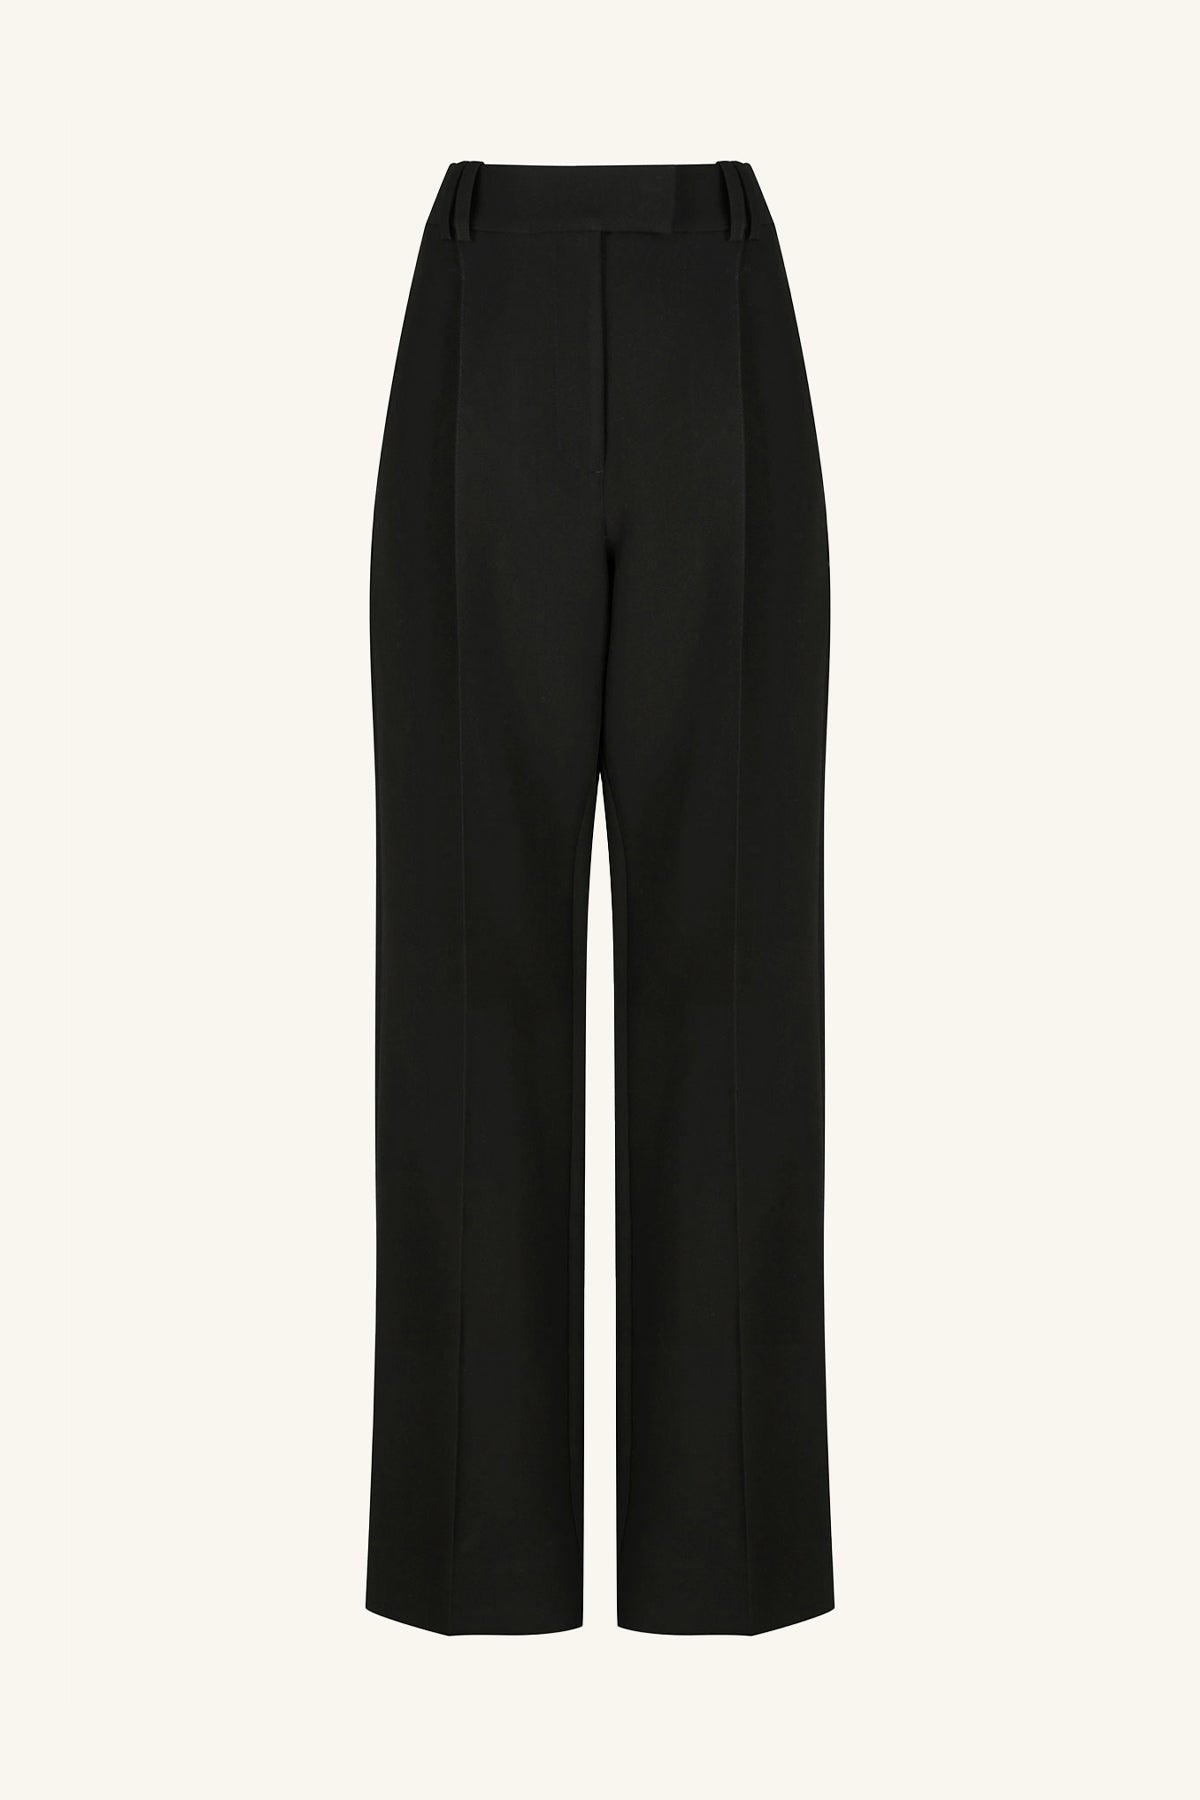 Shop Everyday Crop Trouser | Chic Pleated Women's Pants – The Reset